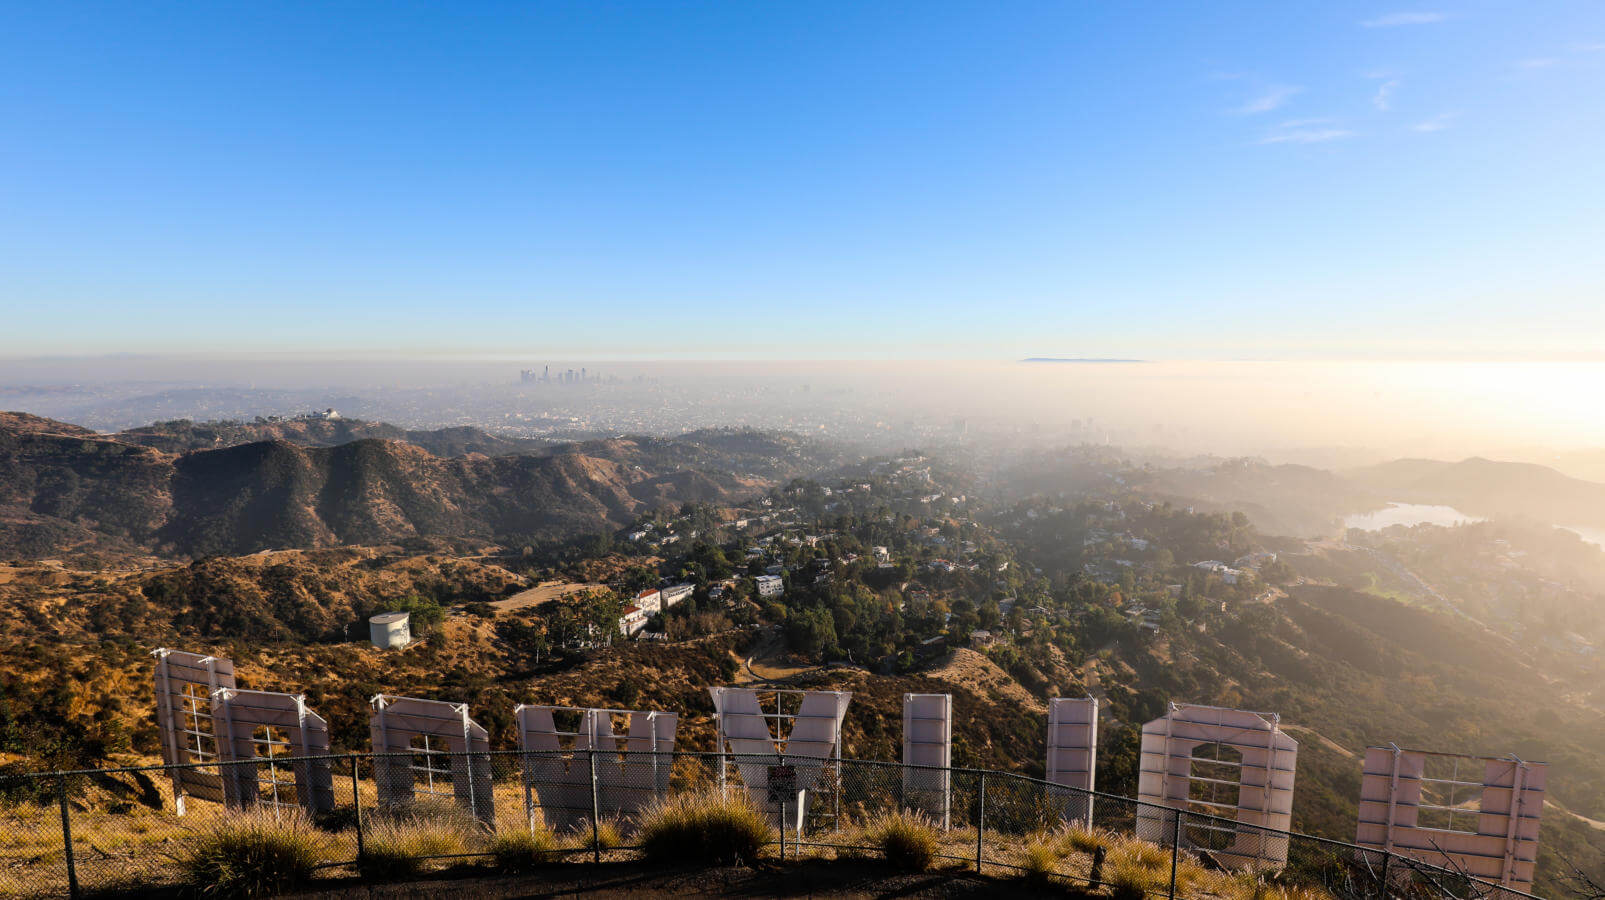 Hollywood is a hot spot for Airbnb